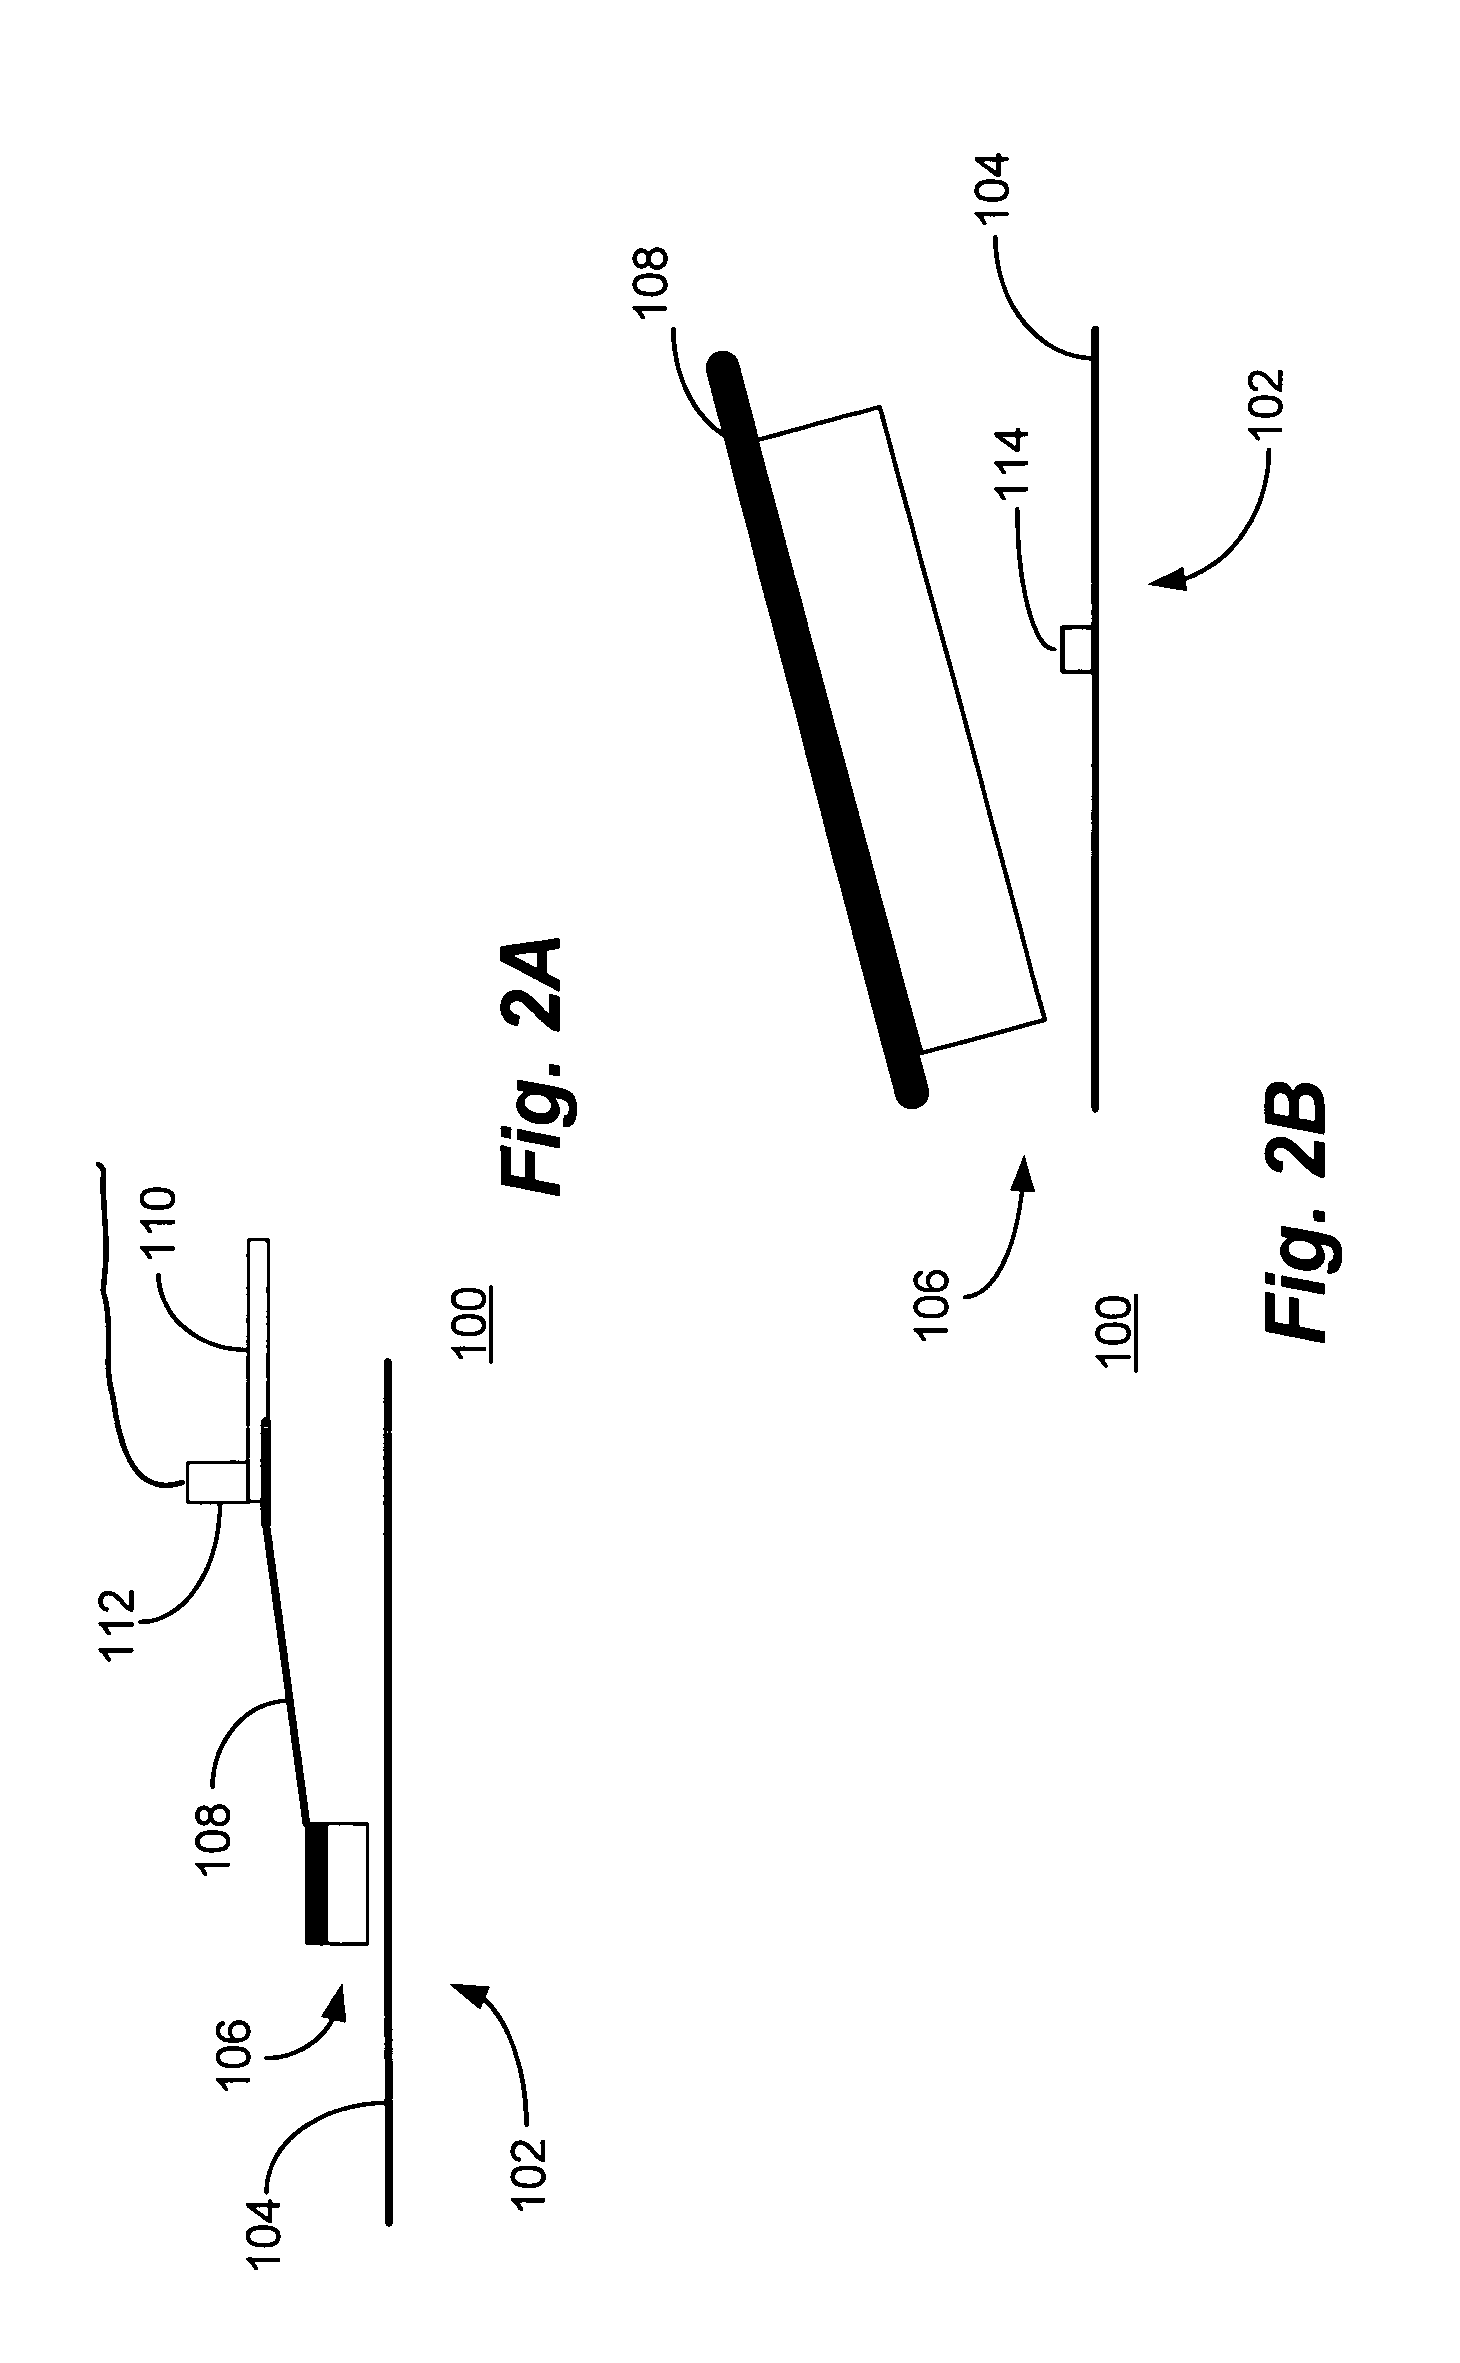 Method for manufacturing a group of head gimbal assemblies